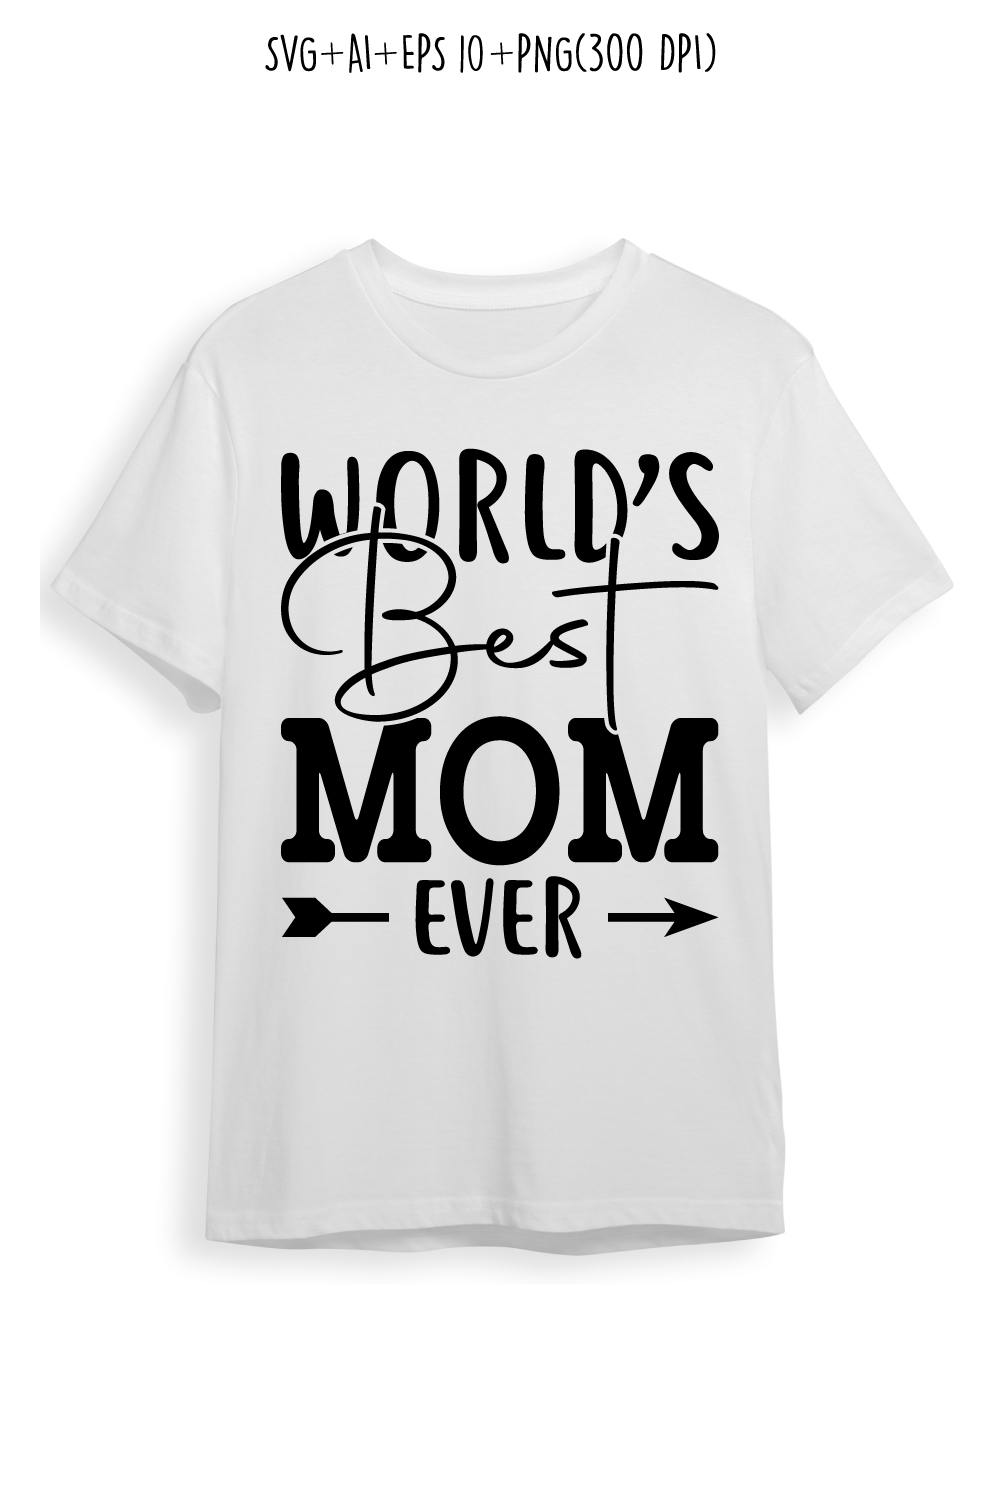 world's best mom ever SVG design for t-shirts, cards, frame artwork, phone cases, bags, mugs, stickers, tumblers, print, etc pinterest preview image.